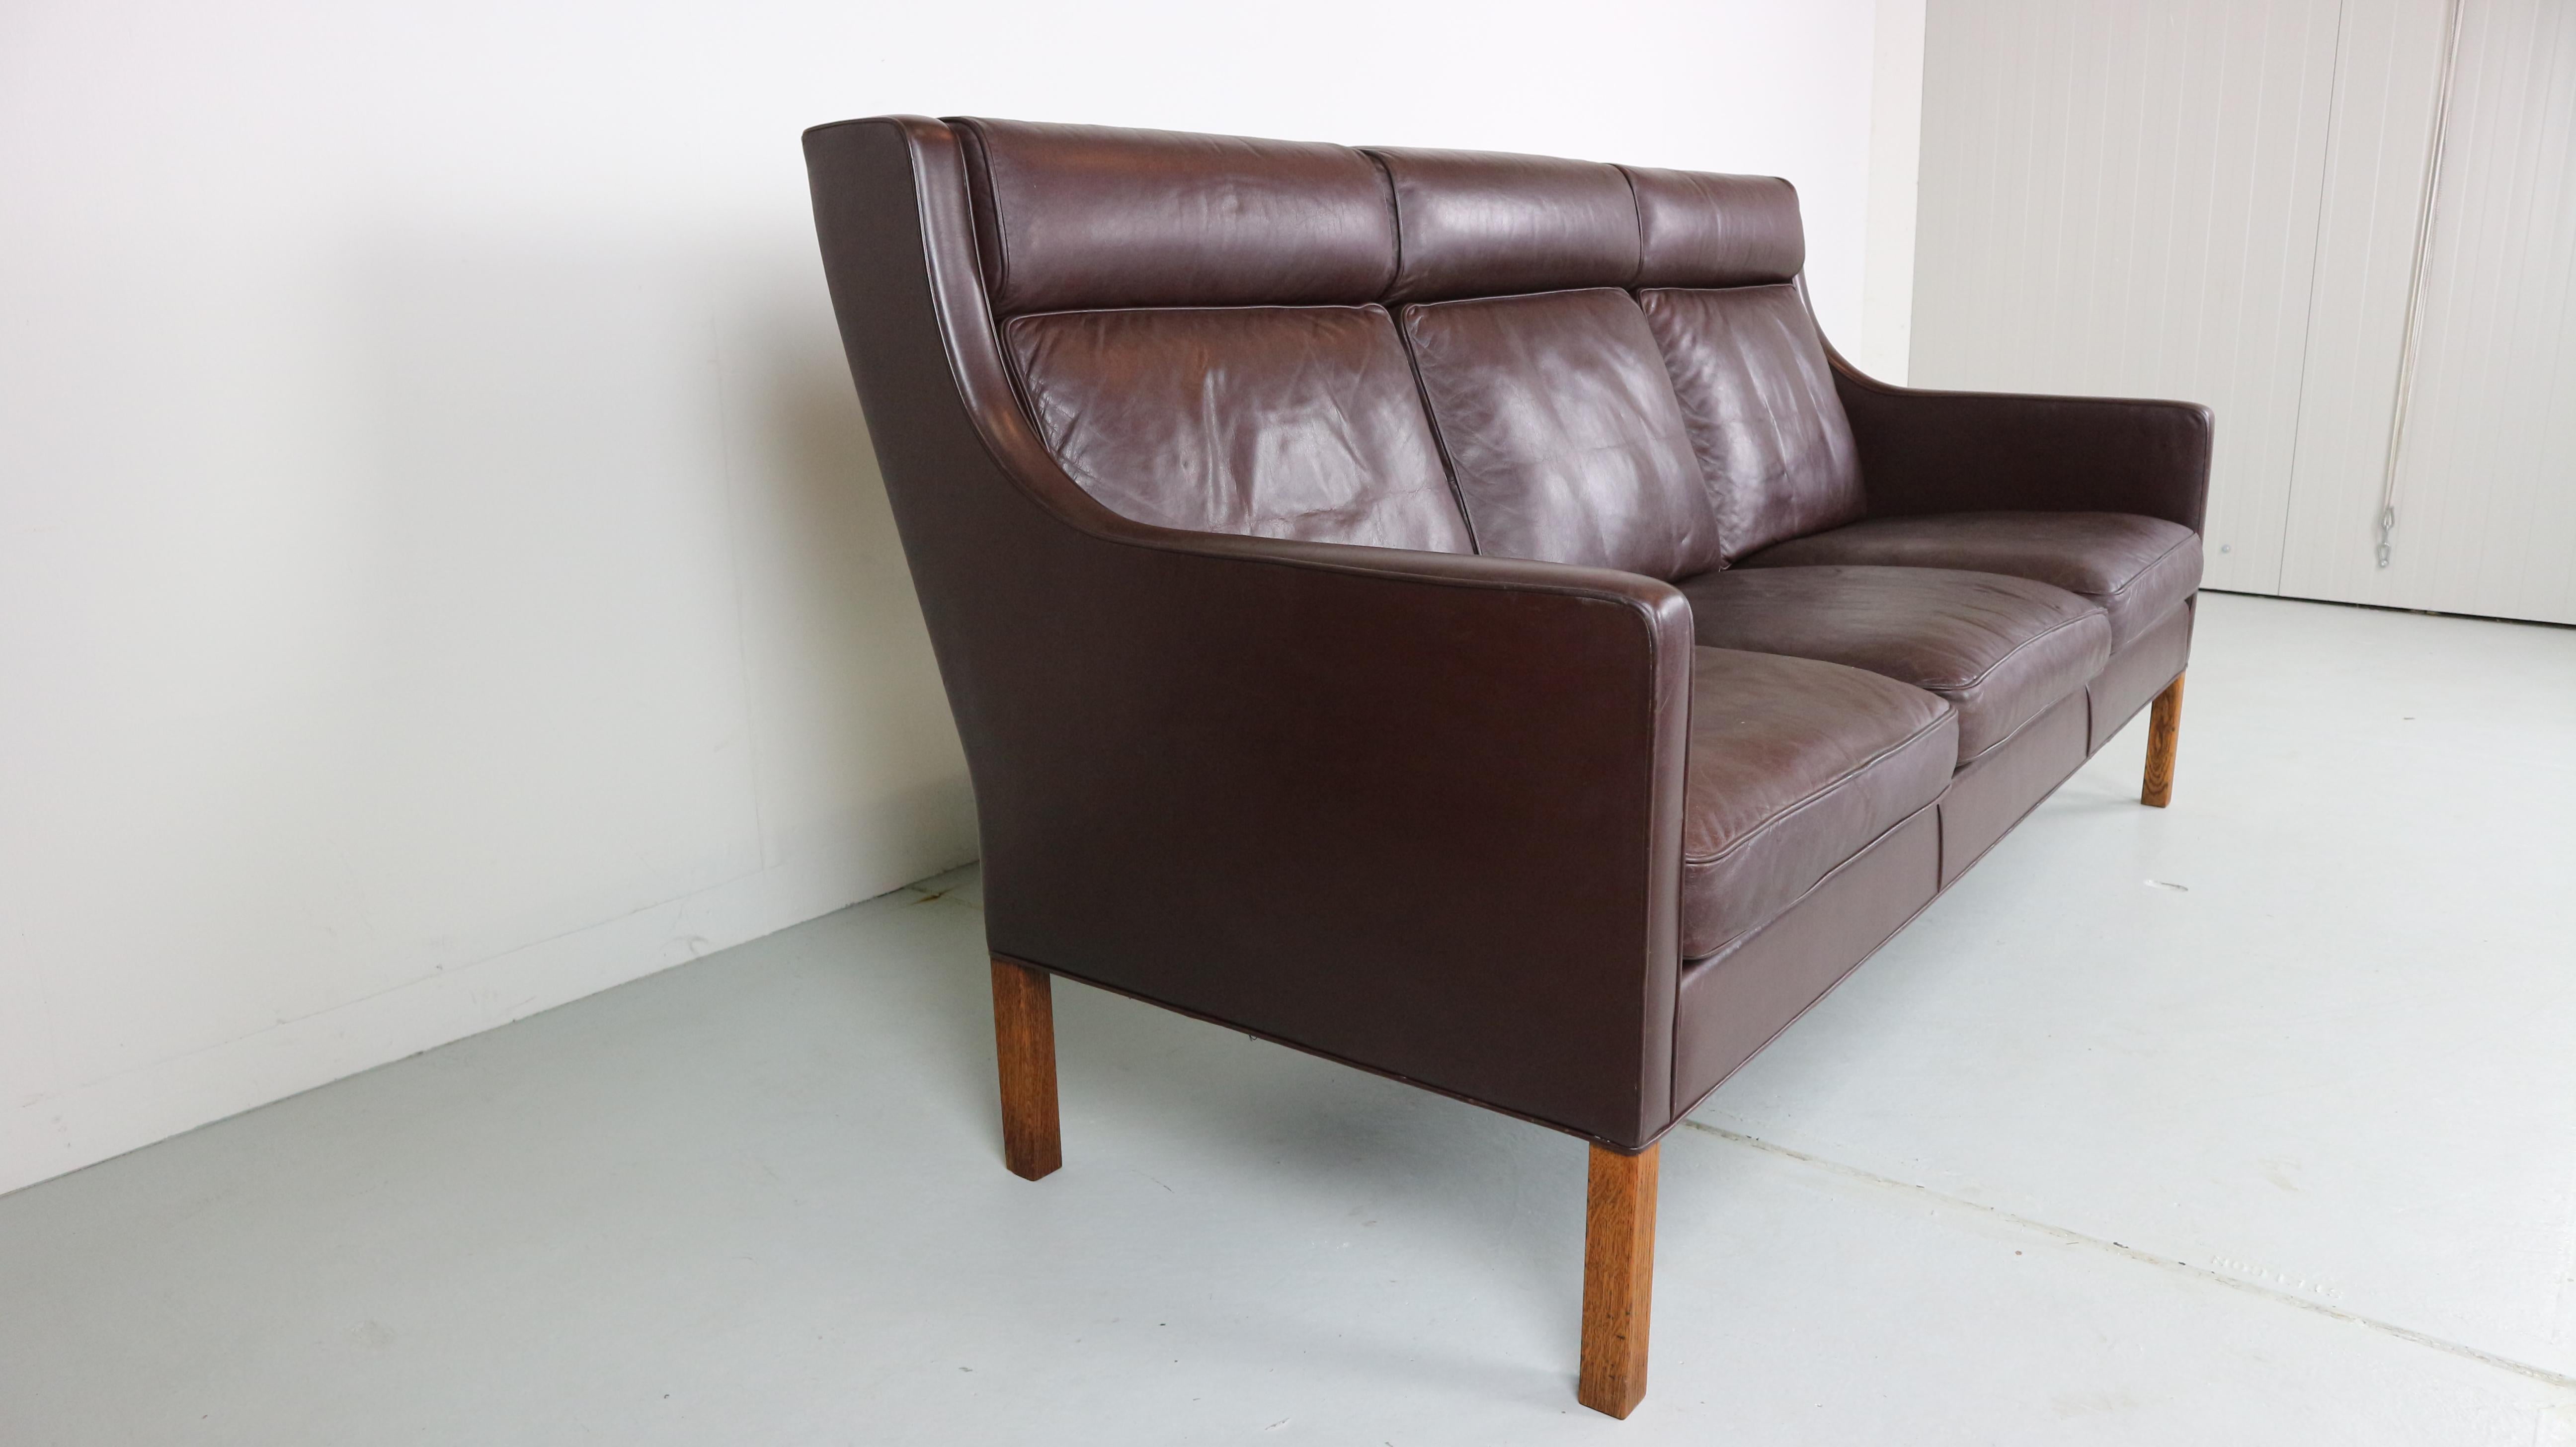 Danish Three-Seat Leather Sofa 2433 by Børge Mogensen for Fredericia Furniture